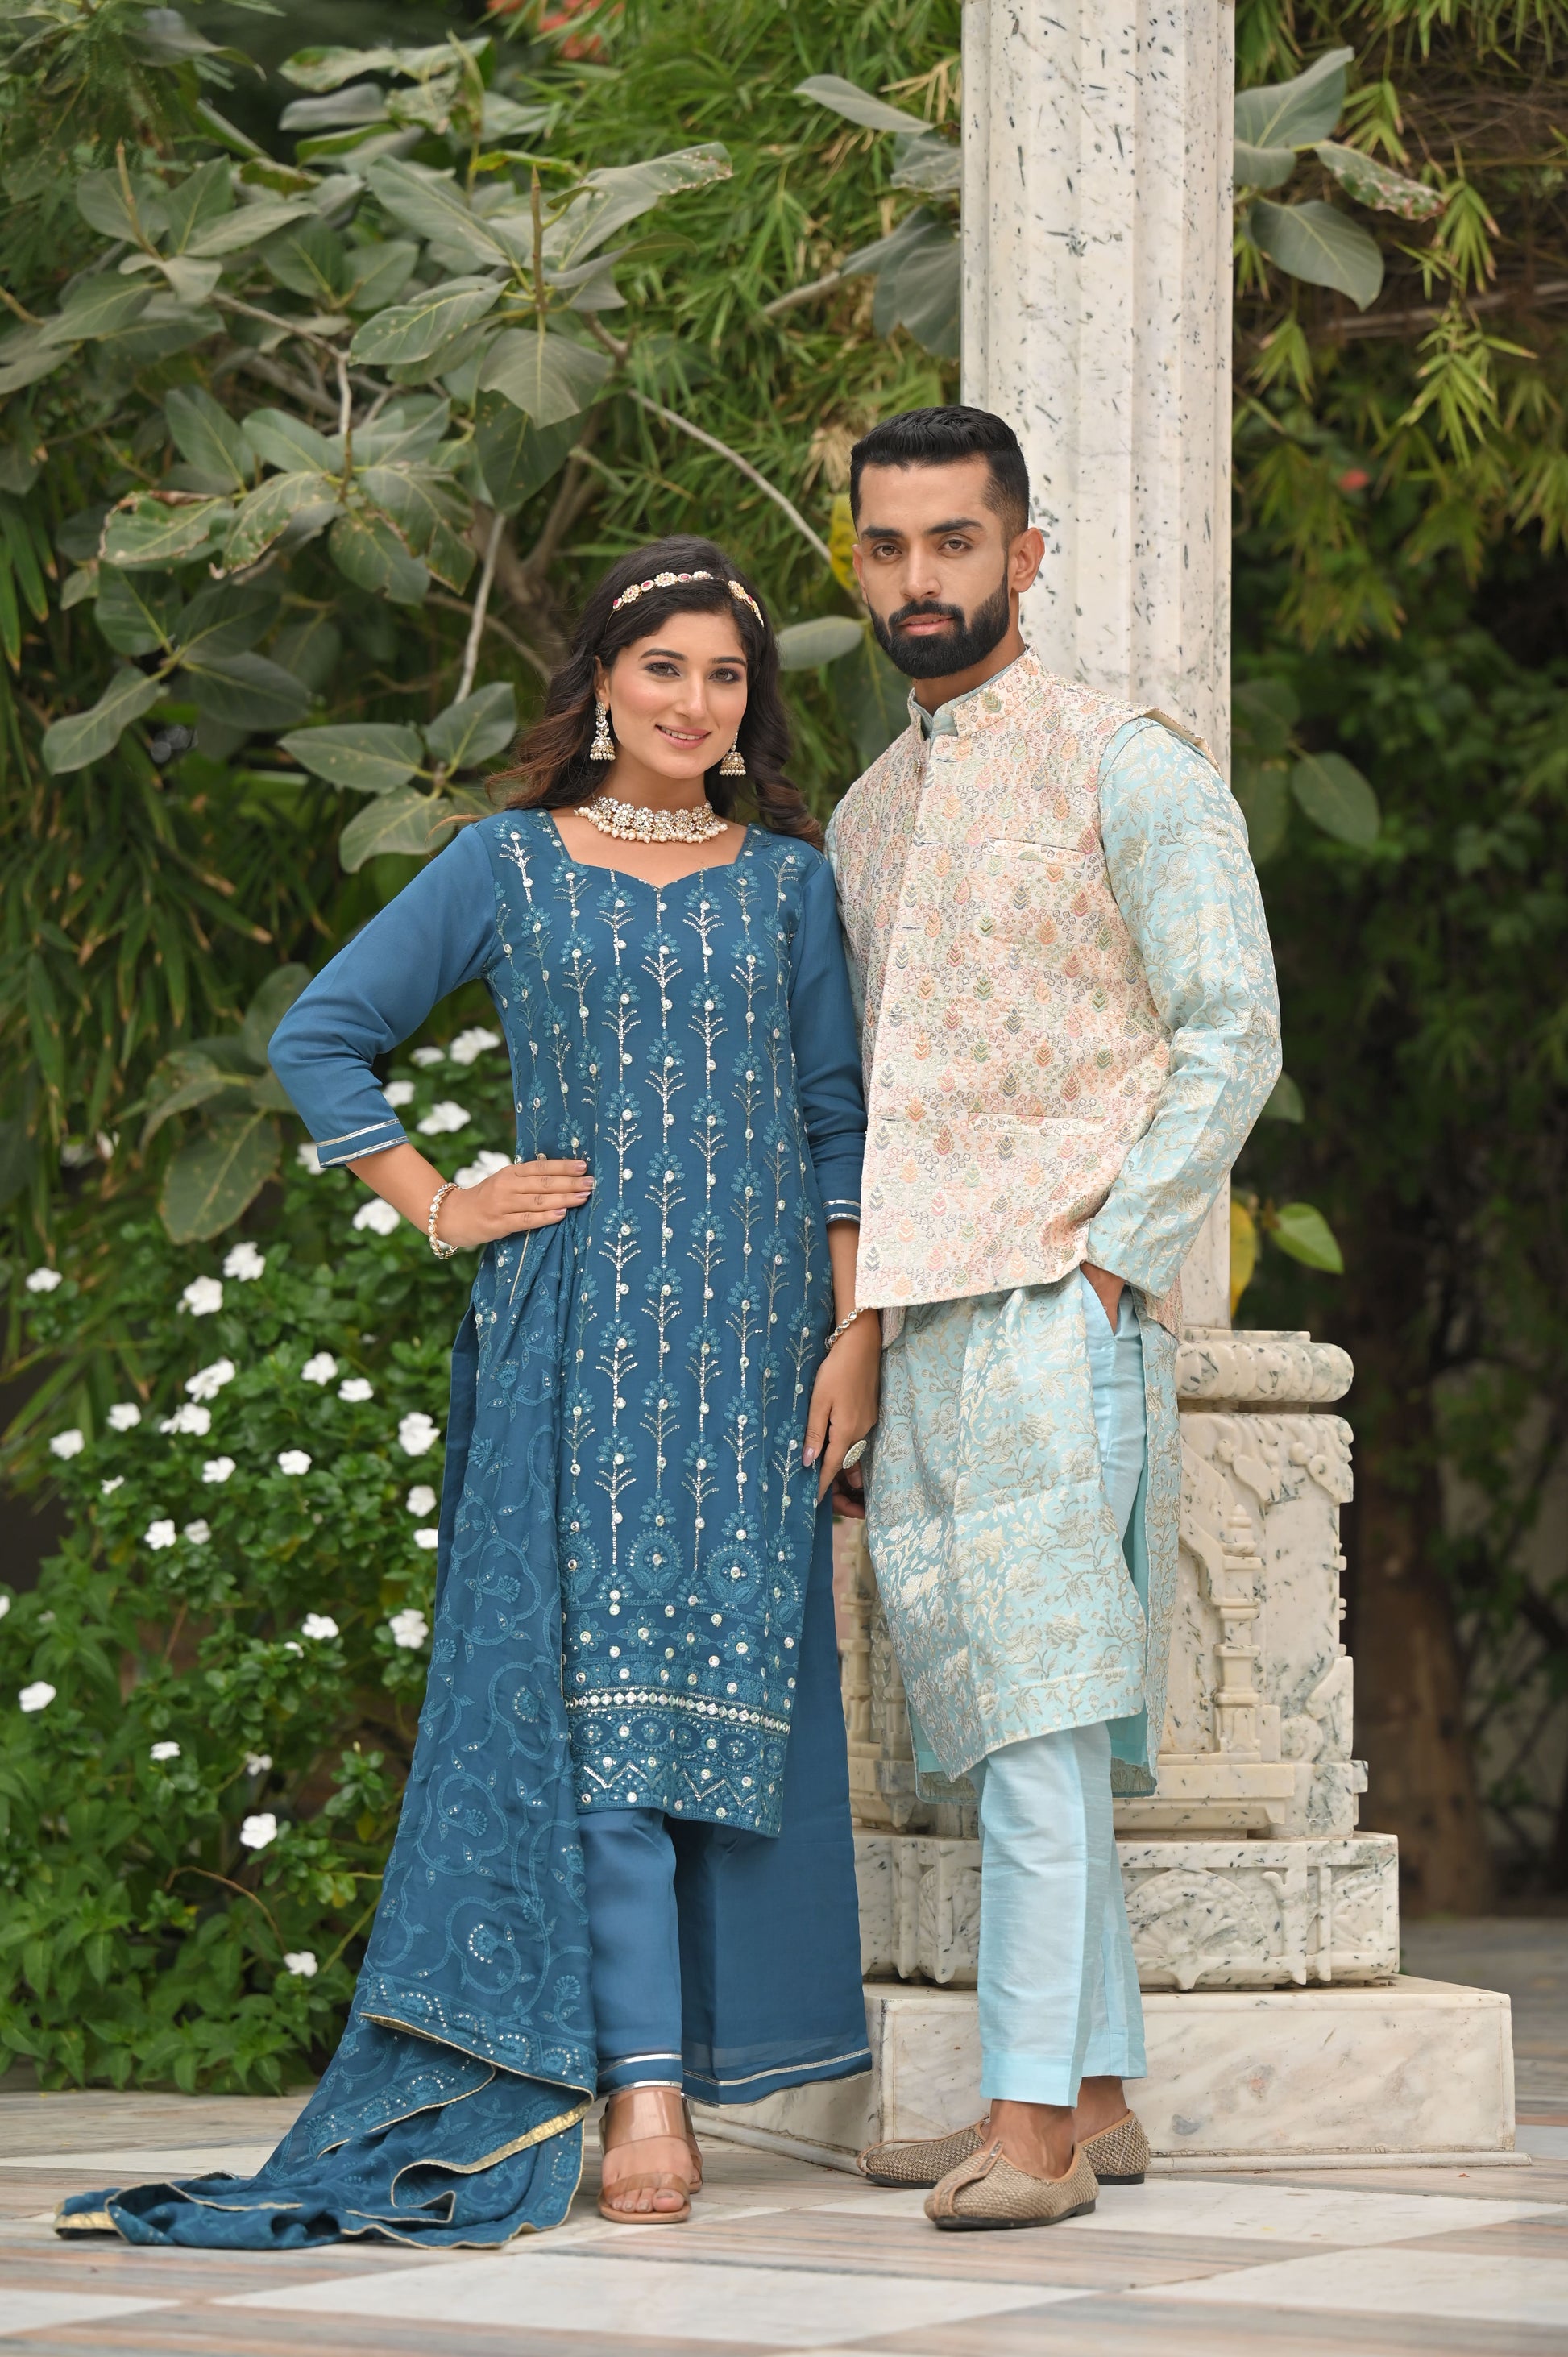 Buy Couple Wedding Dress & Matching Clothes For Couples - Apella